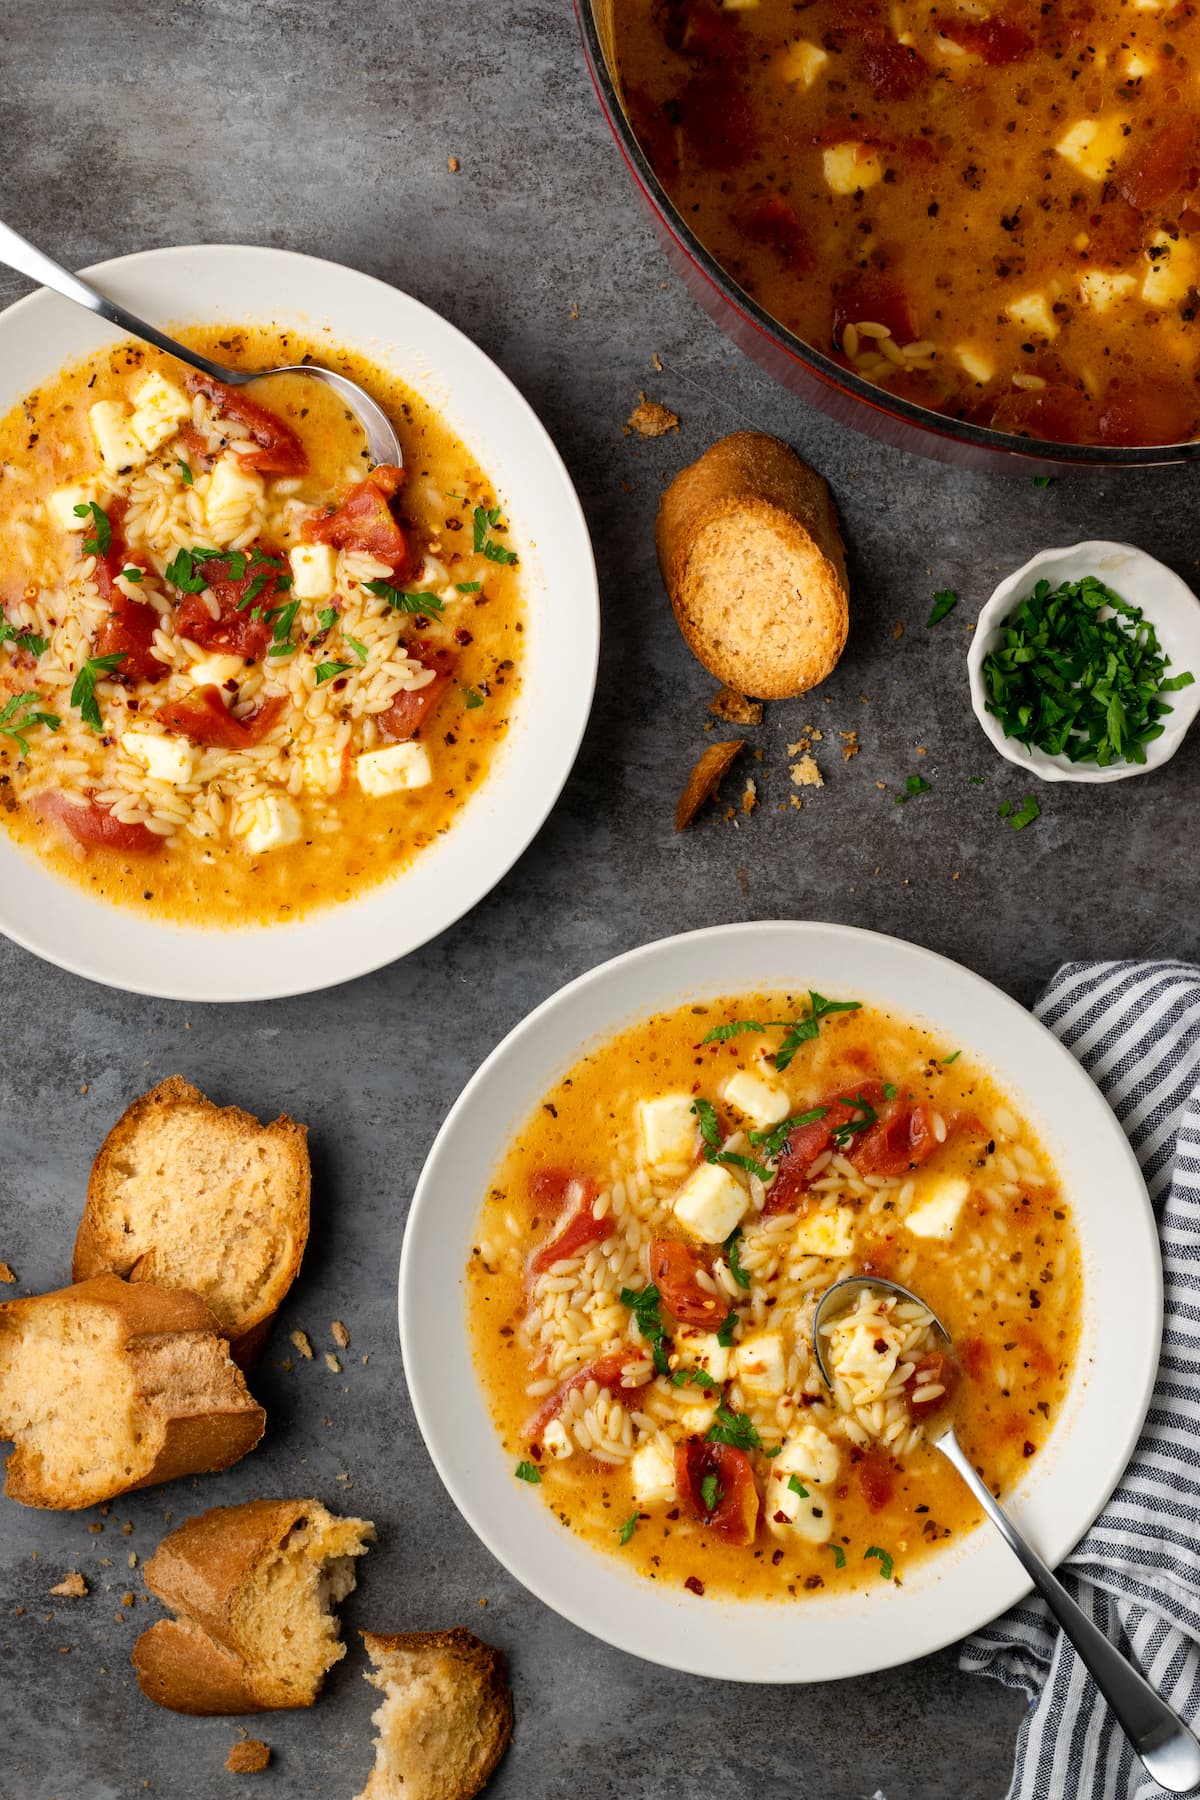 Overhead view of two bowls of Greek tomato feta soup with spoons, next to slices of bread.